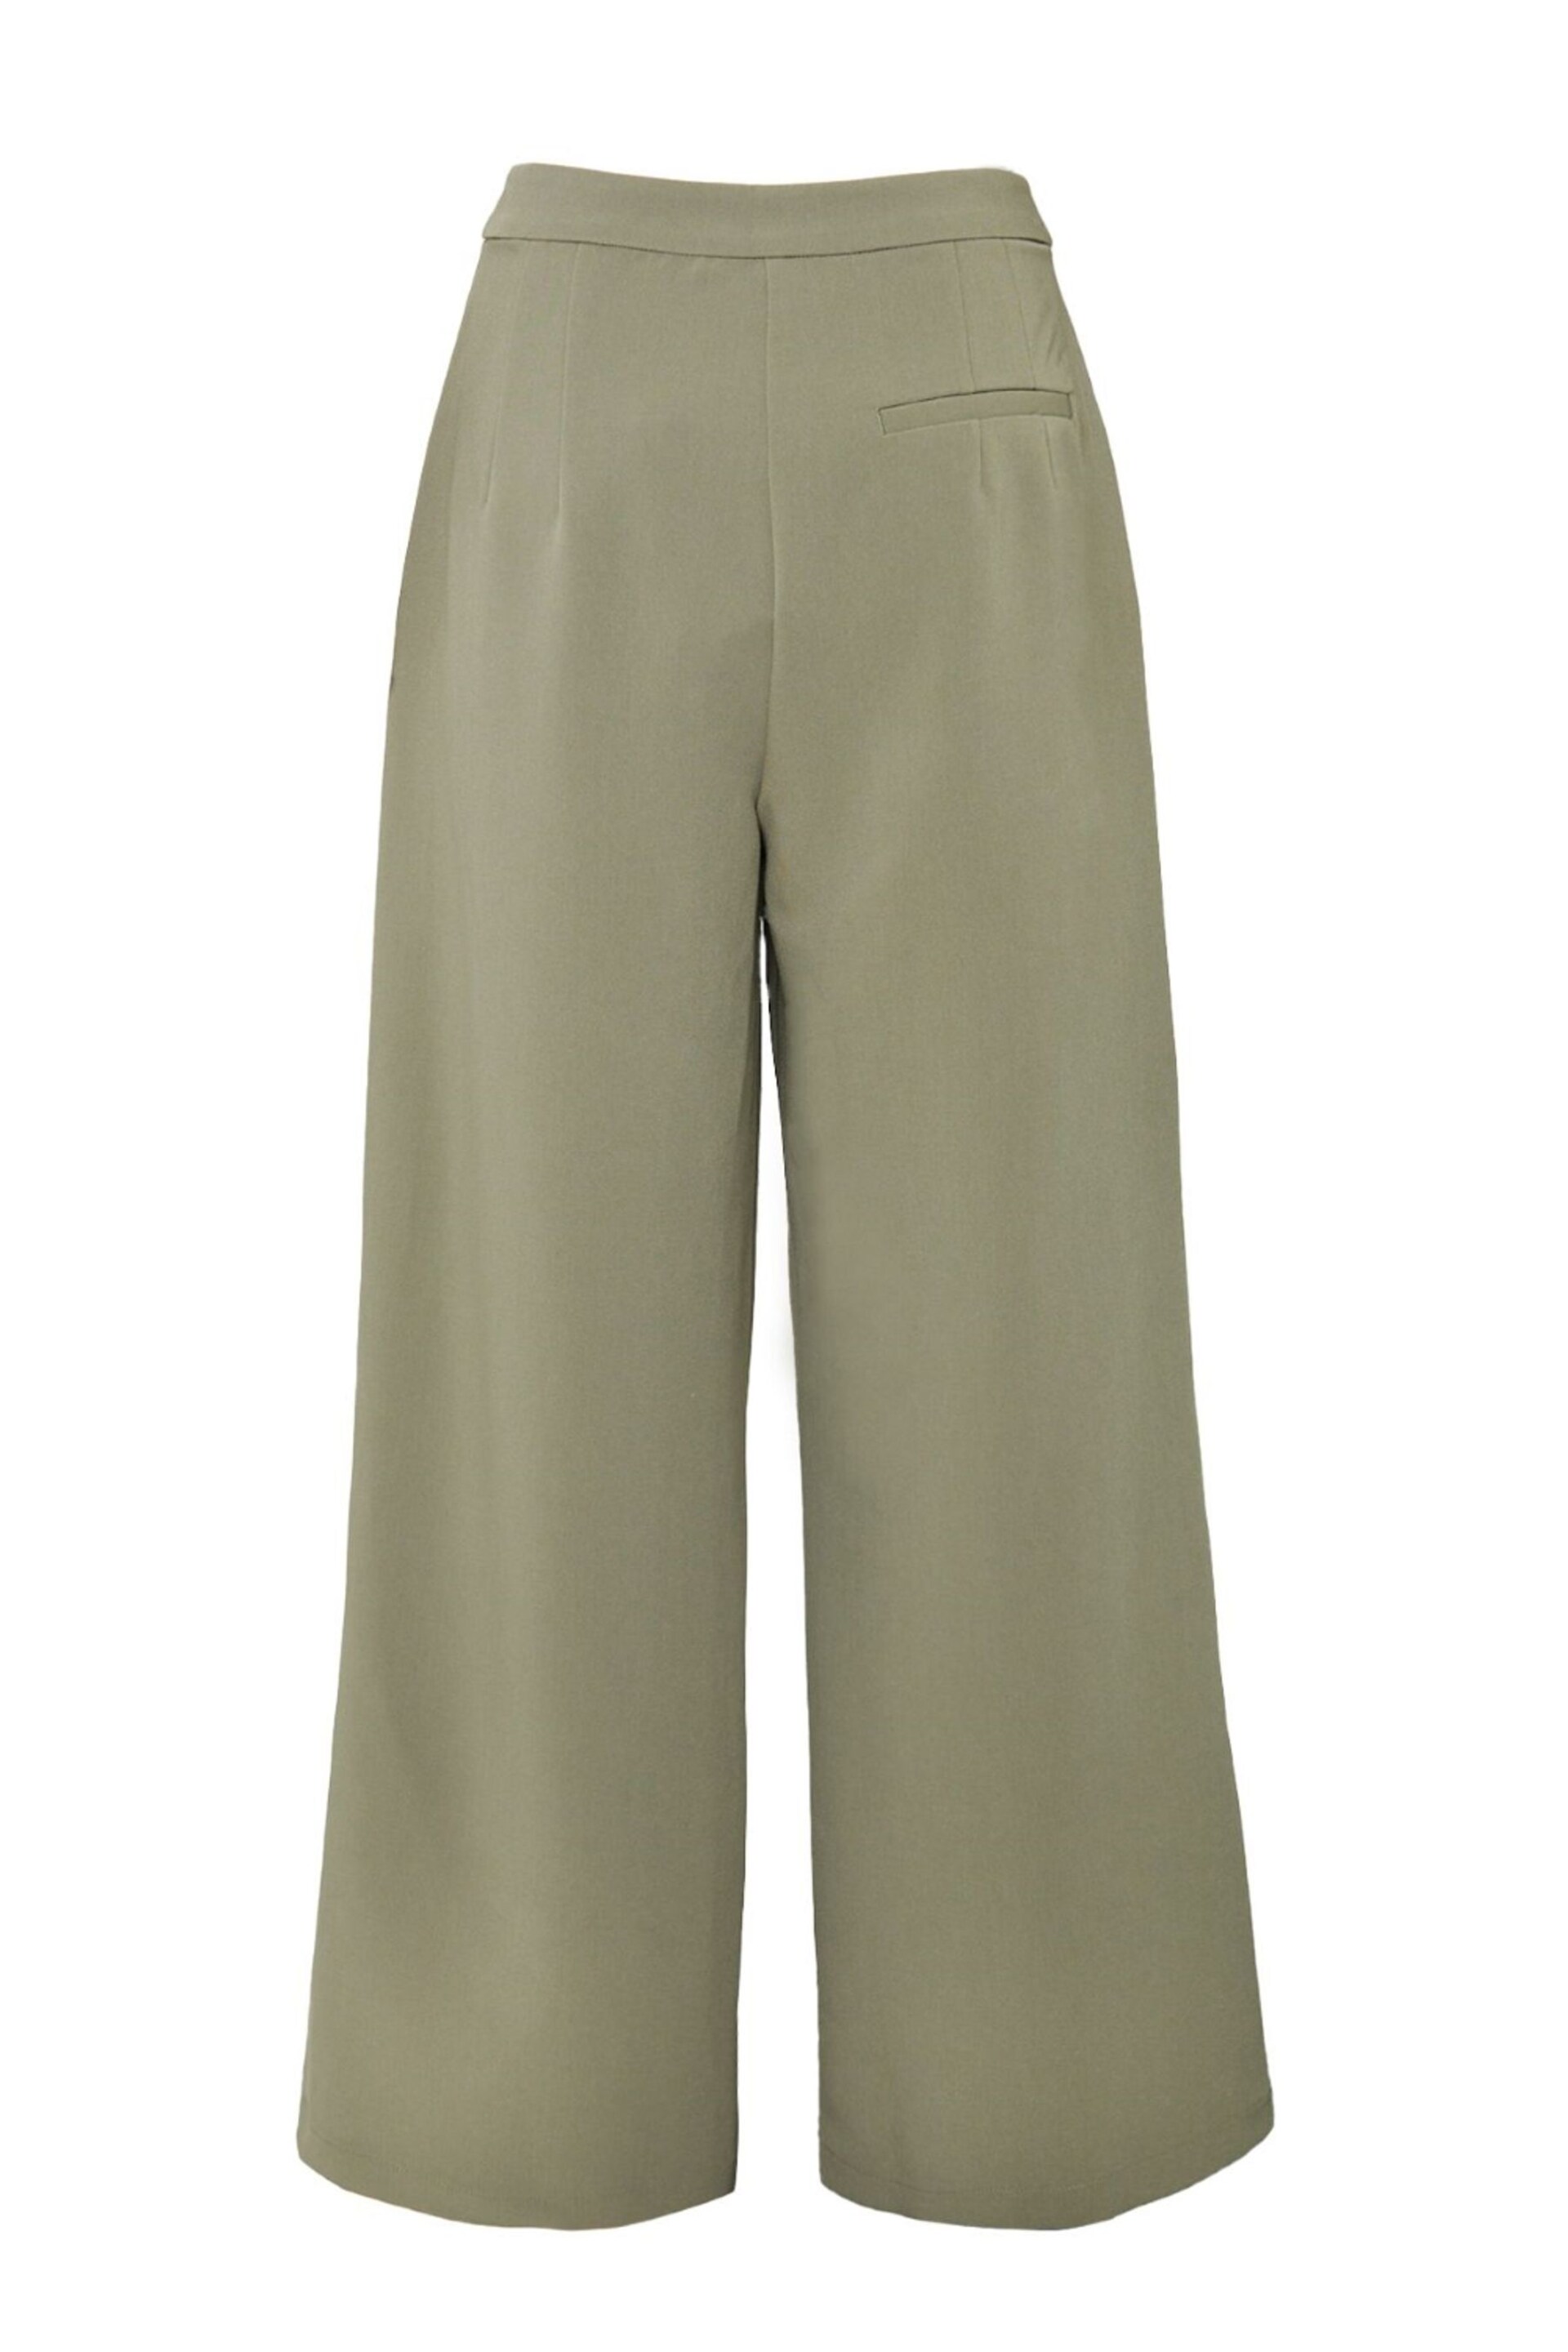 Another Sunday Green Wide Leg Trousers - Image 3 of 5